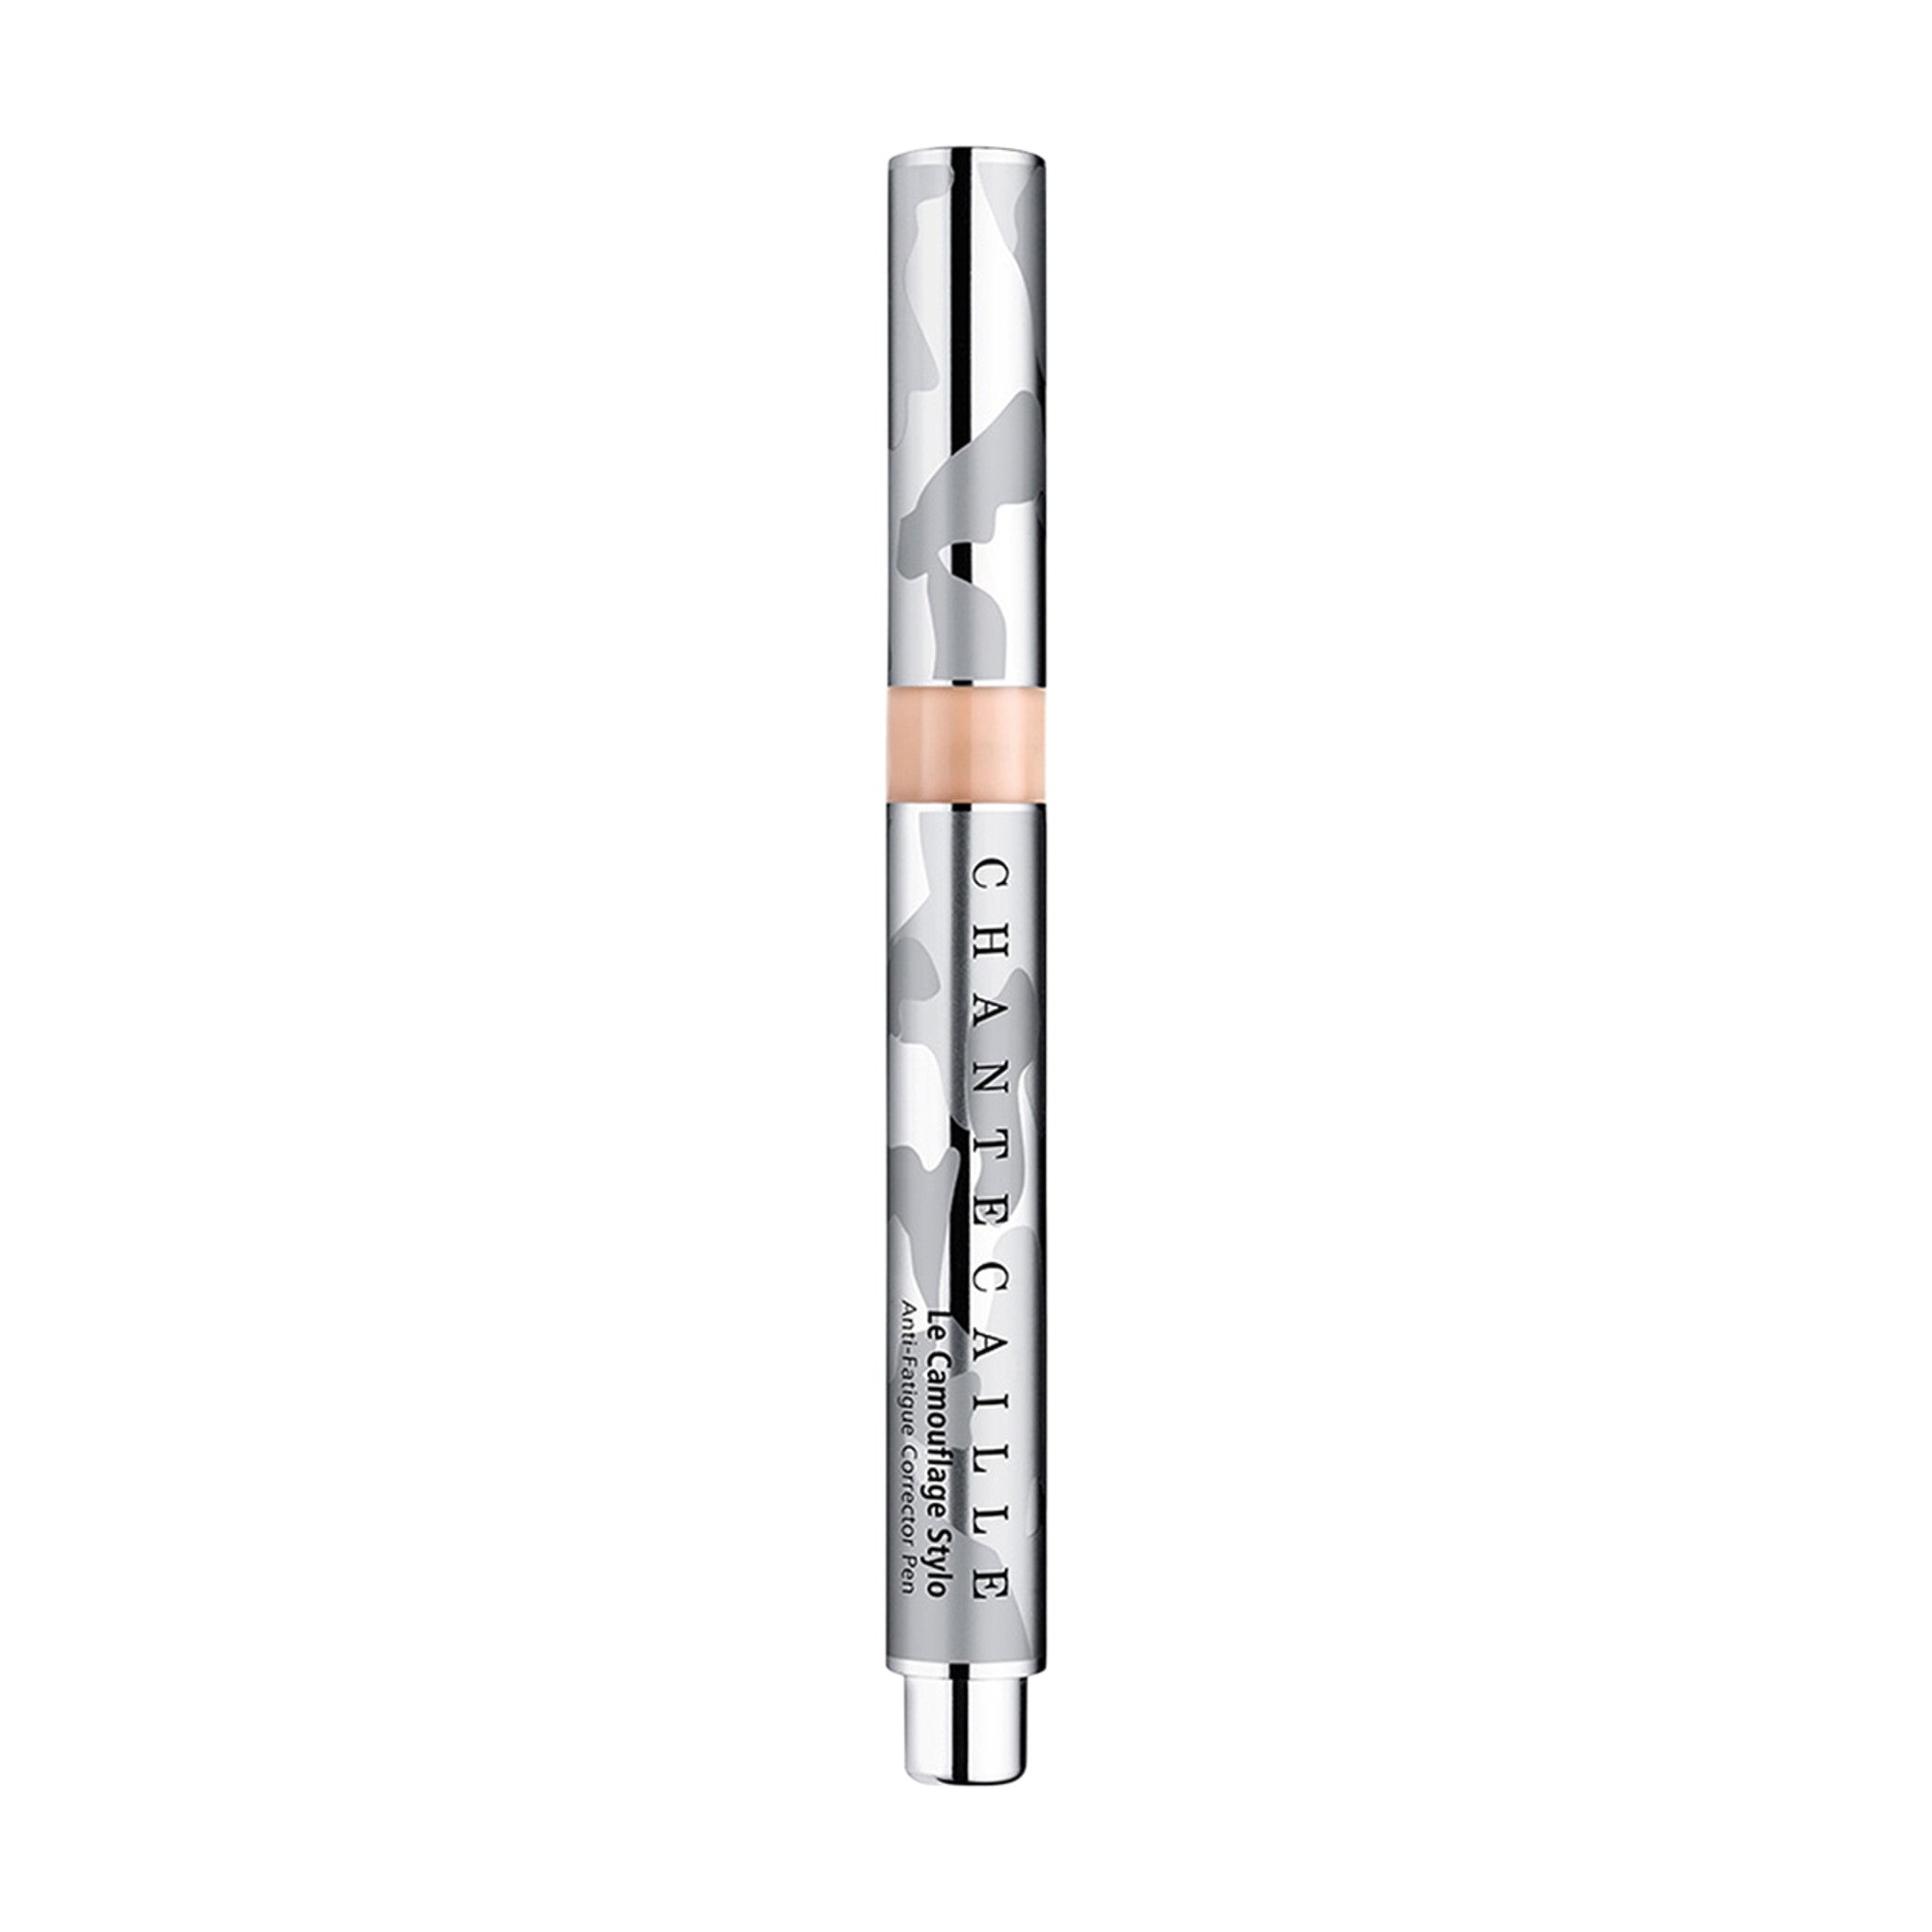 Le Camouflage Stylo Concealer main image.